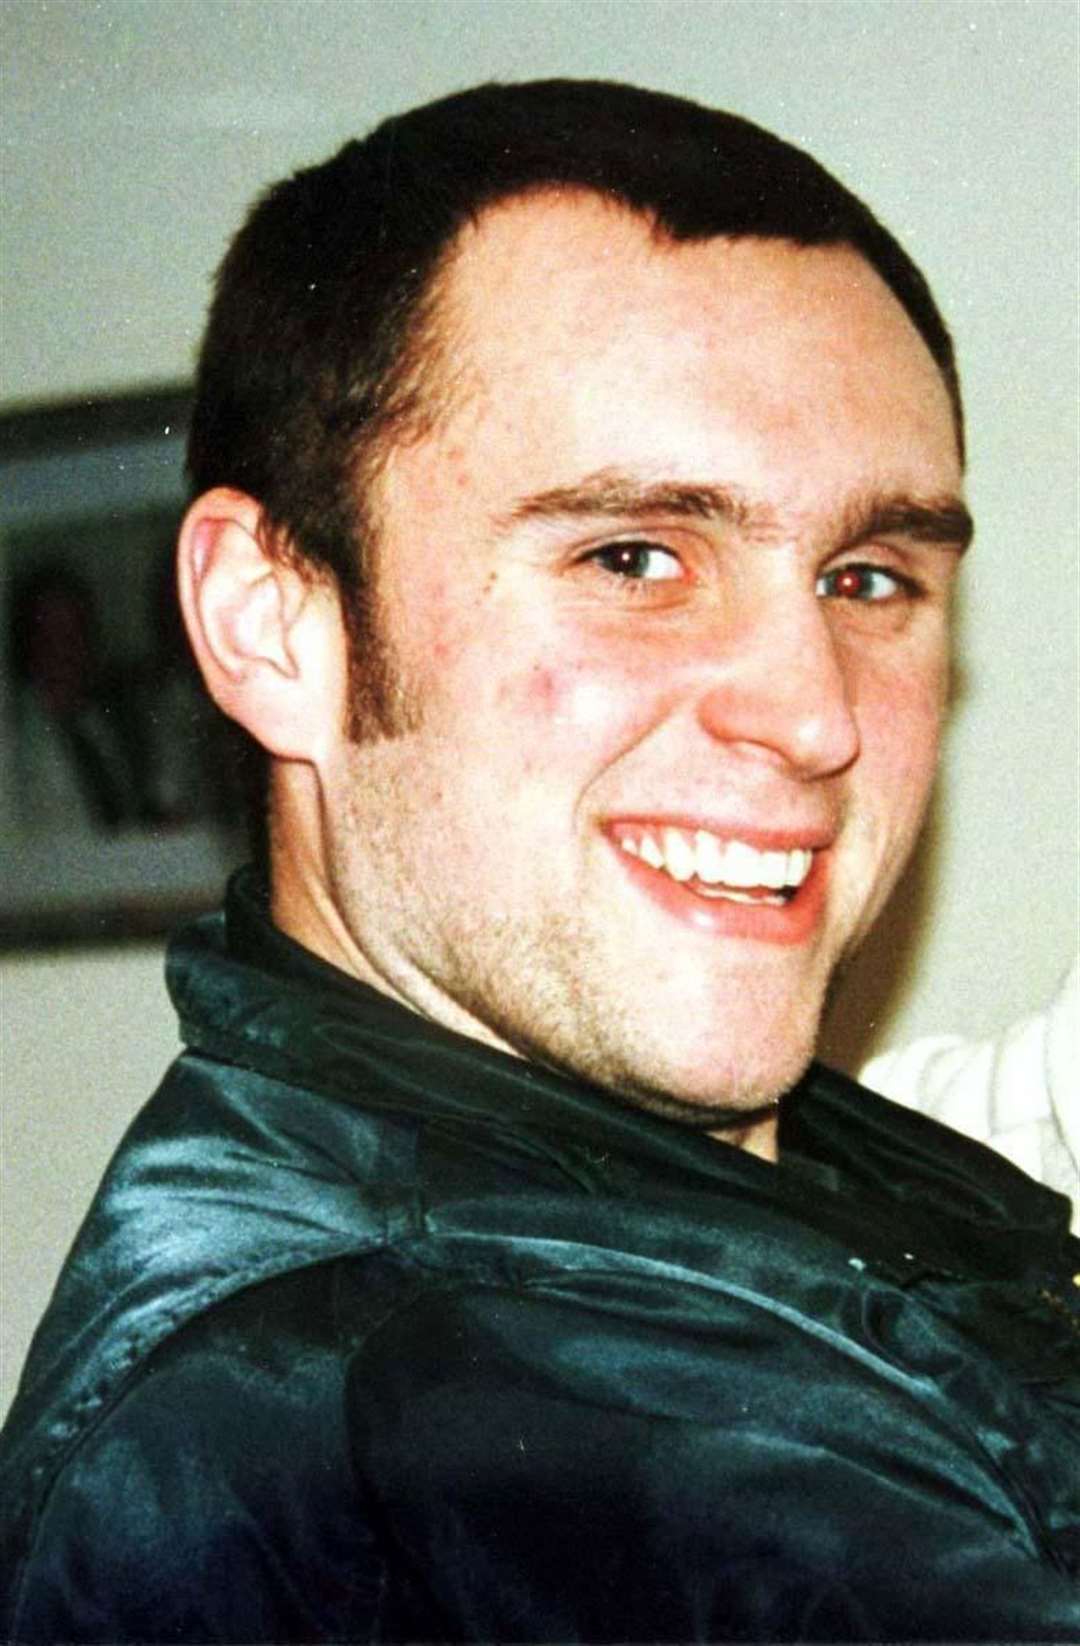 Stephen Cameron, who was murdered by Kenneth Noye in a road rage incident in 1996. Photo - Family Handout/PA Wire